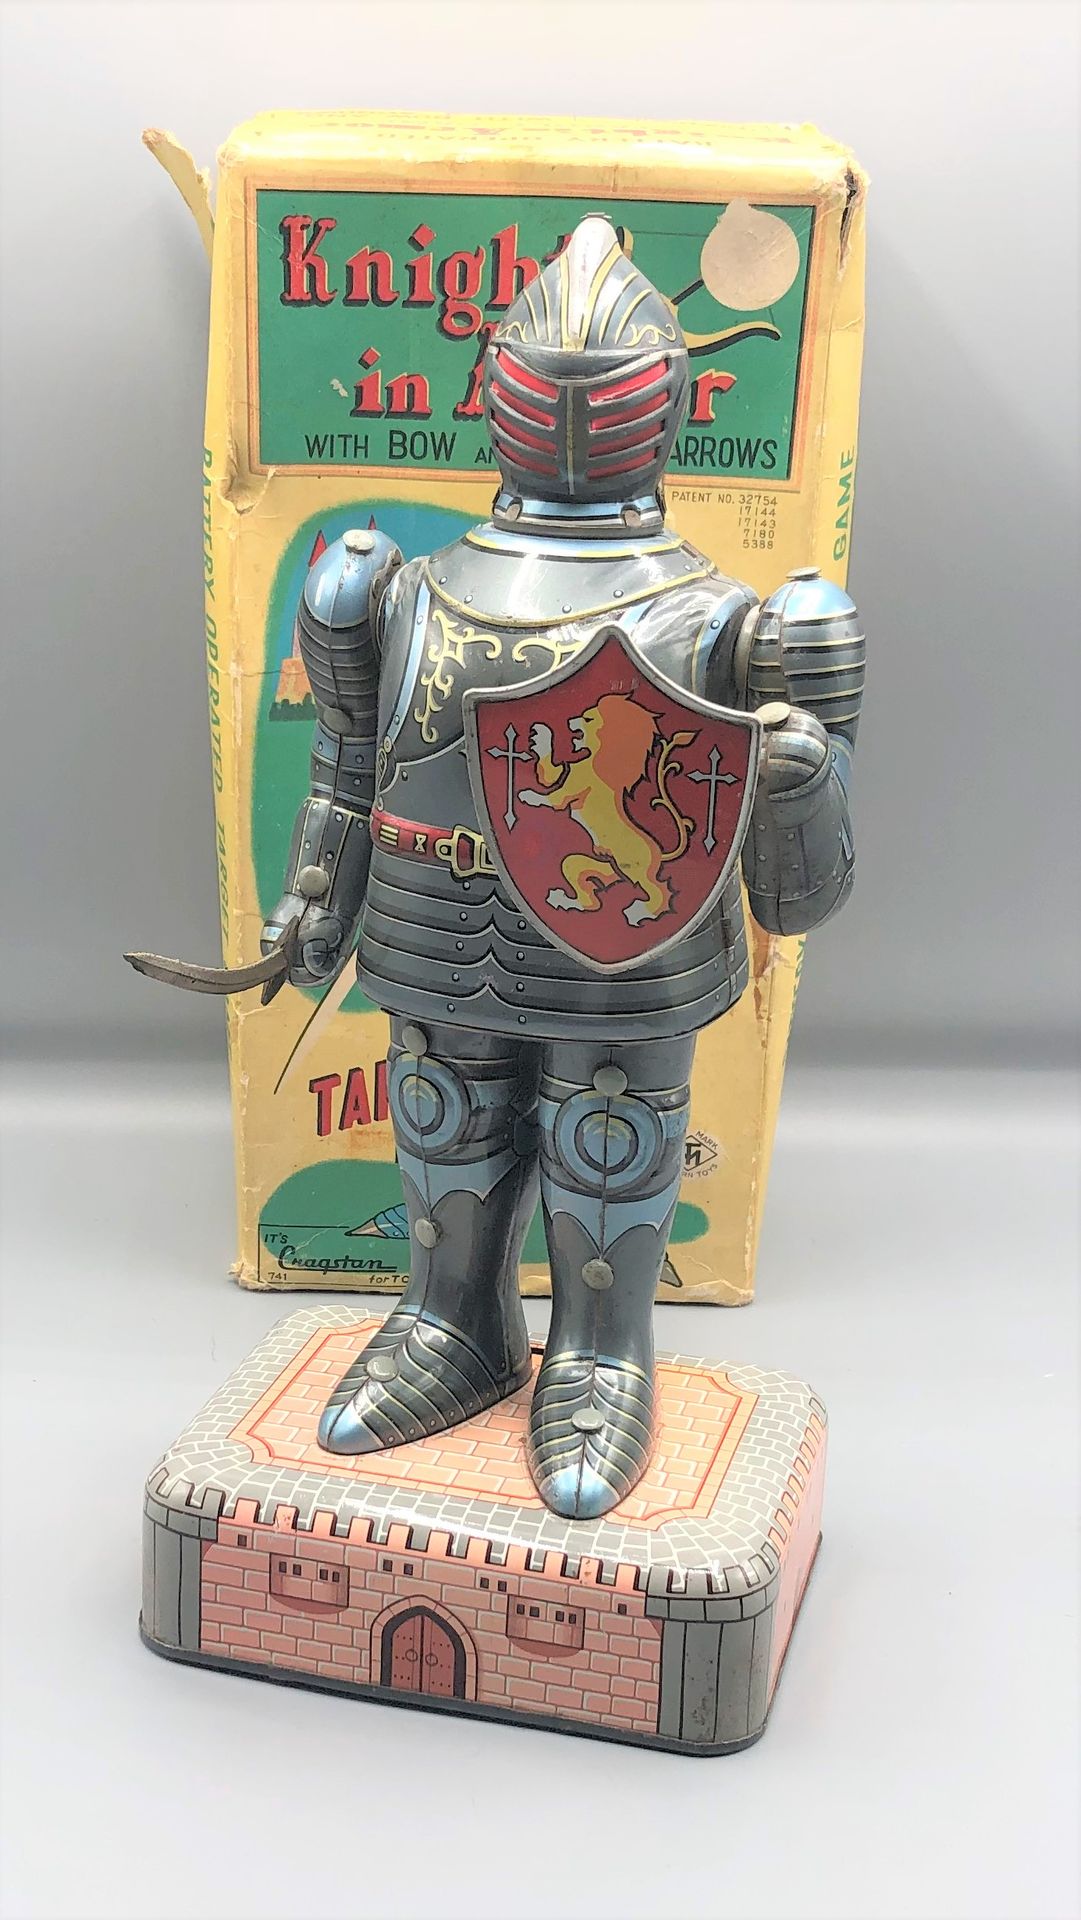 Null TM JAPAN

Knight in armor ( KNIGHT IN ARMOR) presented in its original box.&hellip;